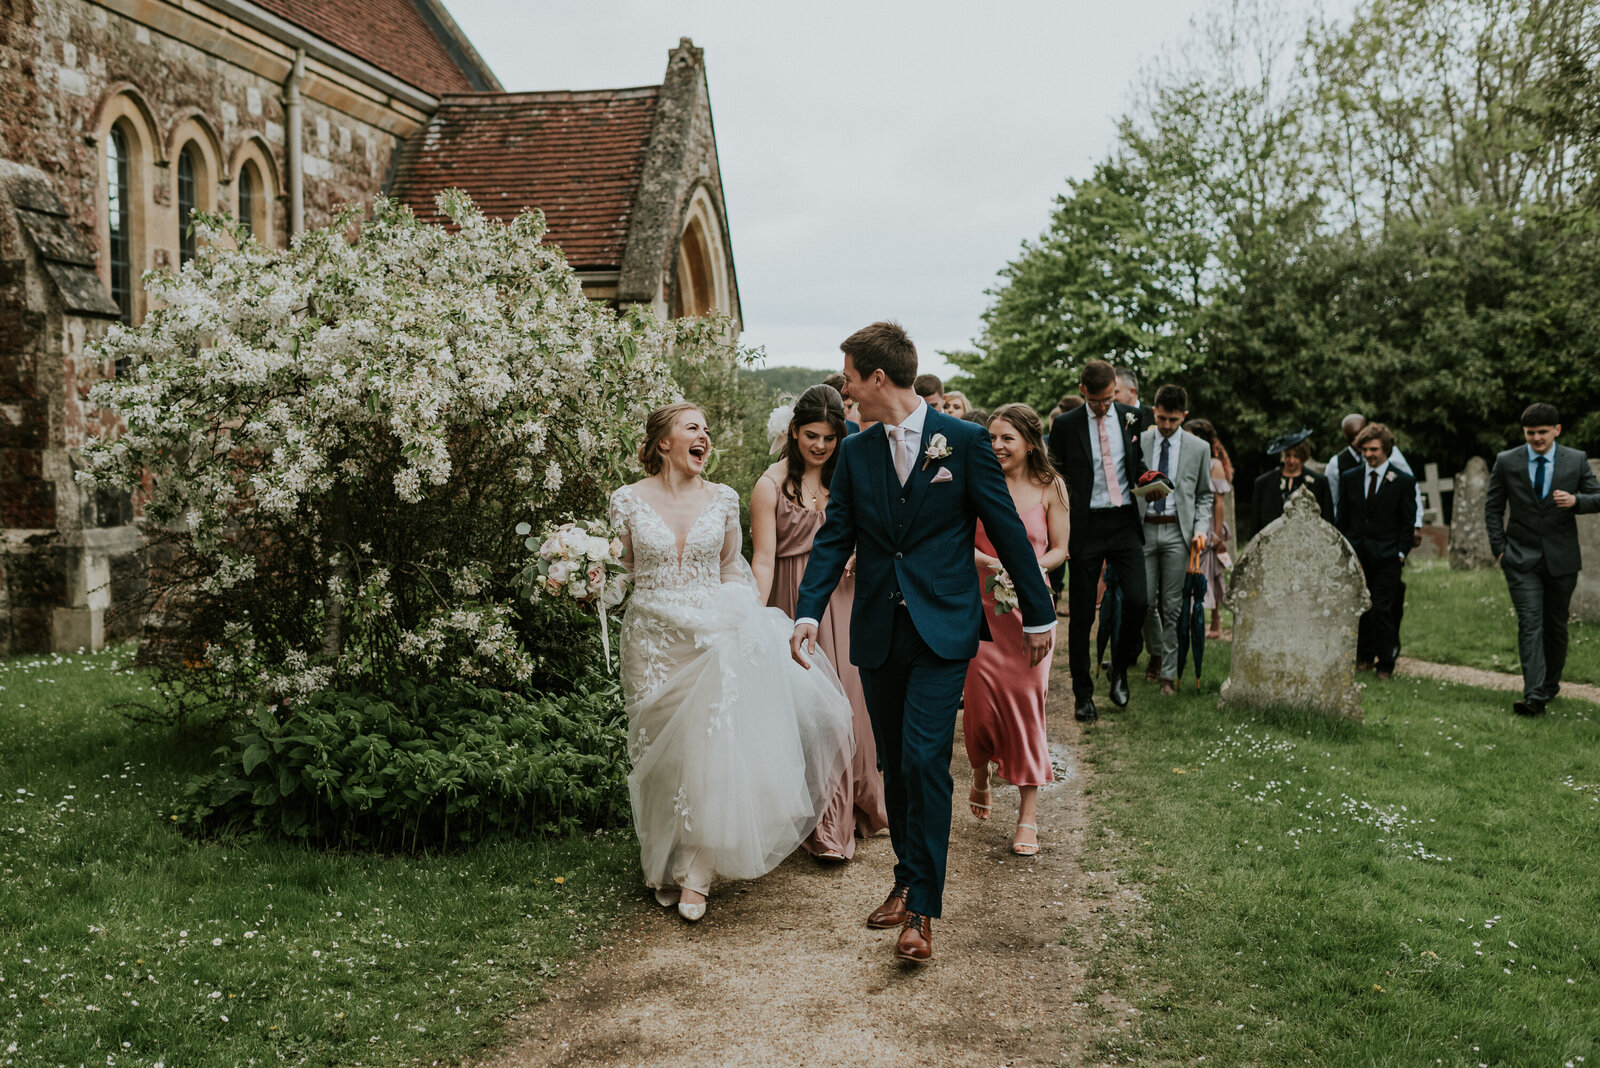 Bride and groom laughing as they walk with their guests